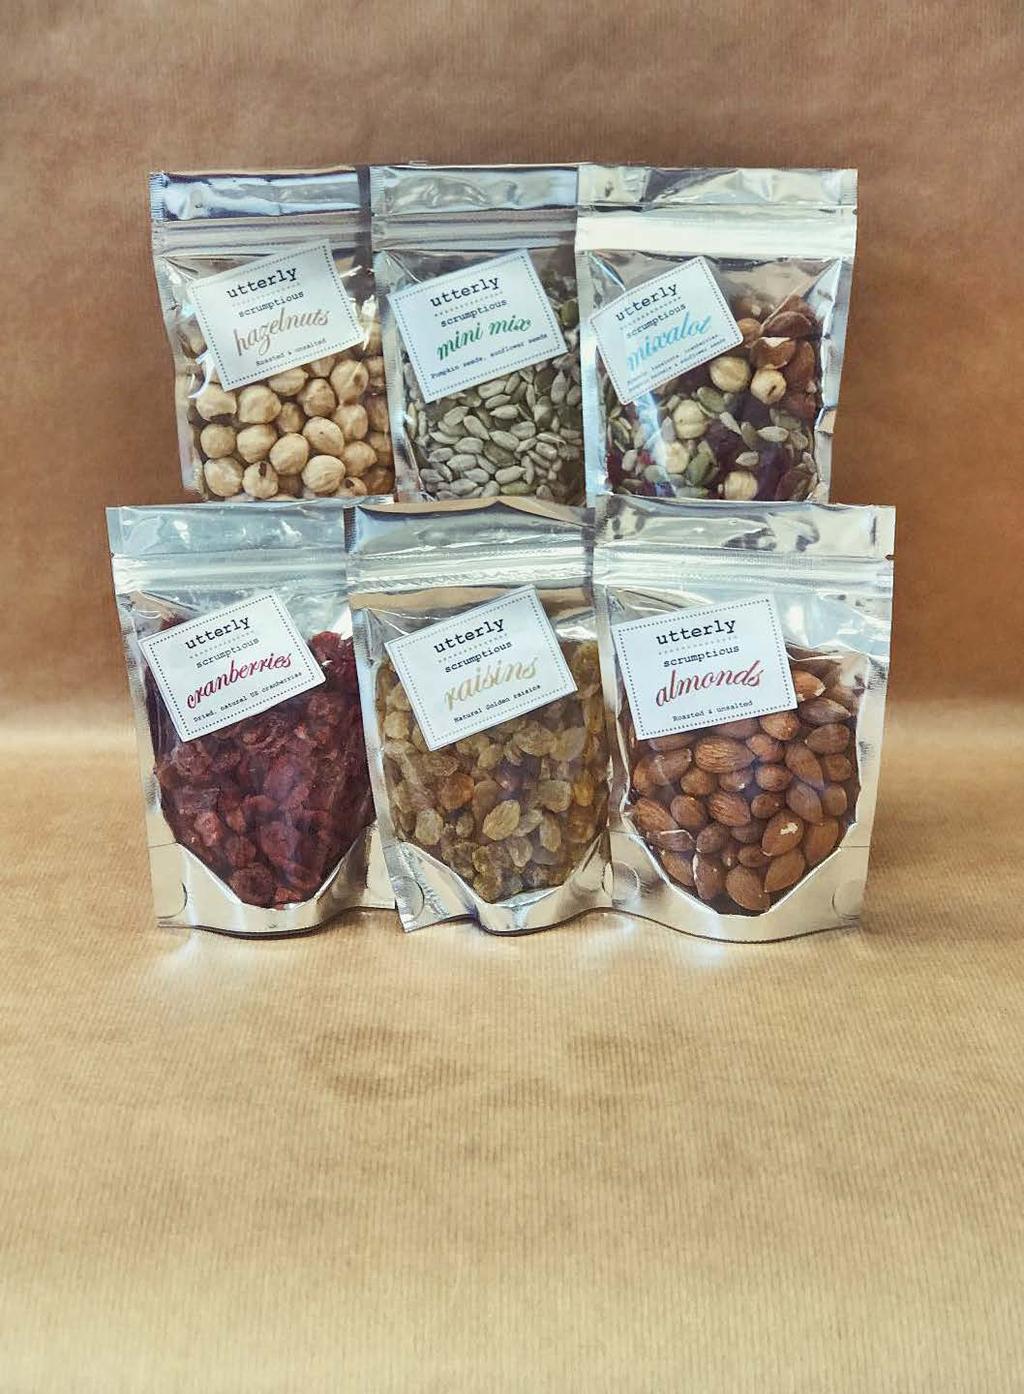 PACKET NUTS 1 2 3 AND DRIED FRUITS YOUR HEALTHY ENERGY SNACKS 1 HAZELNUTS Roasted & Unsalted 2 MINI MIX Pumpkin Kernels and Sunflower Seeds 3 MIX- A - LOT Almonds,